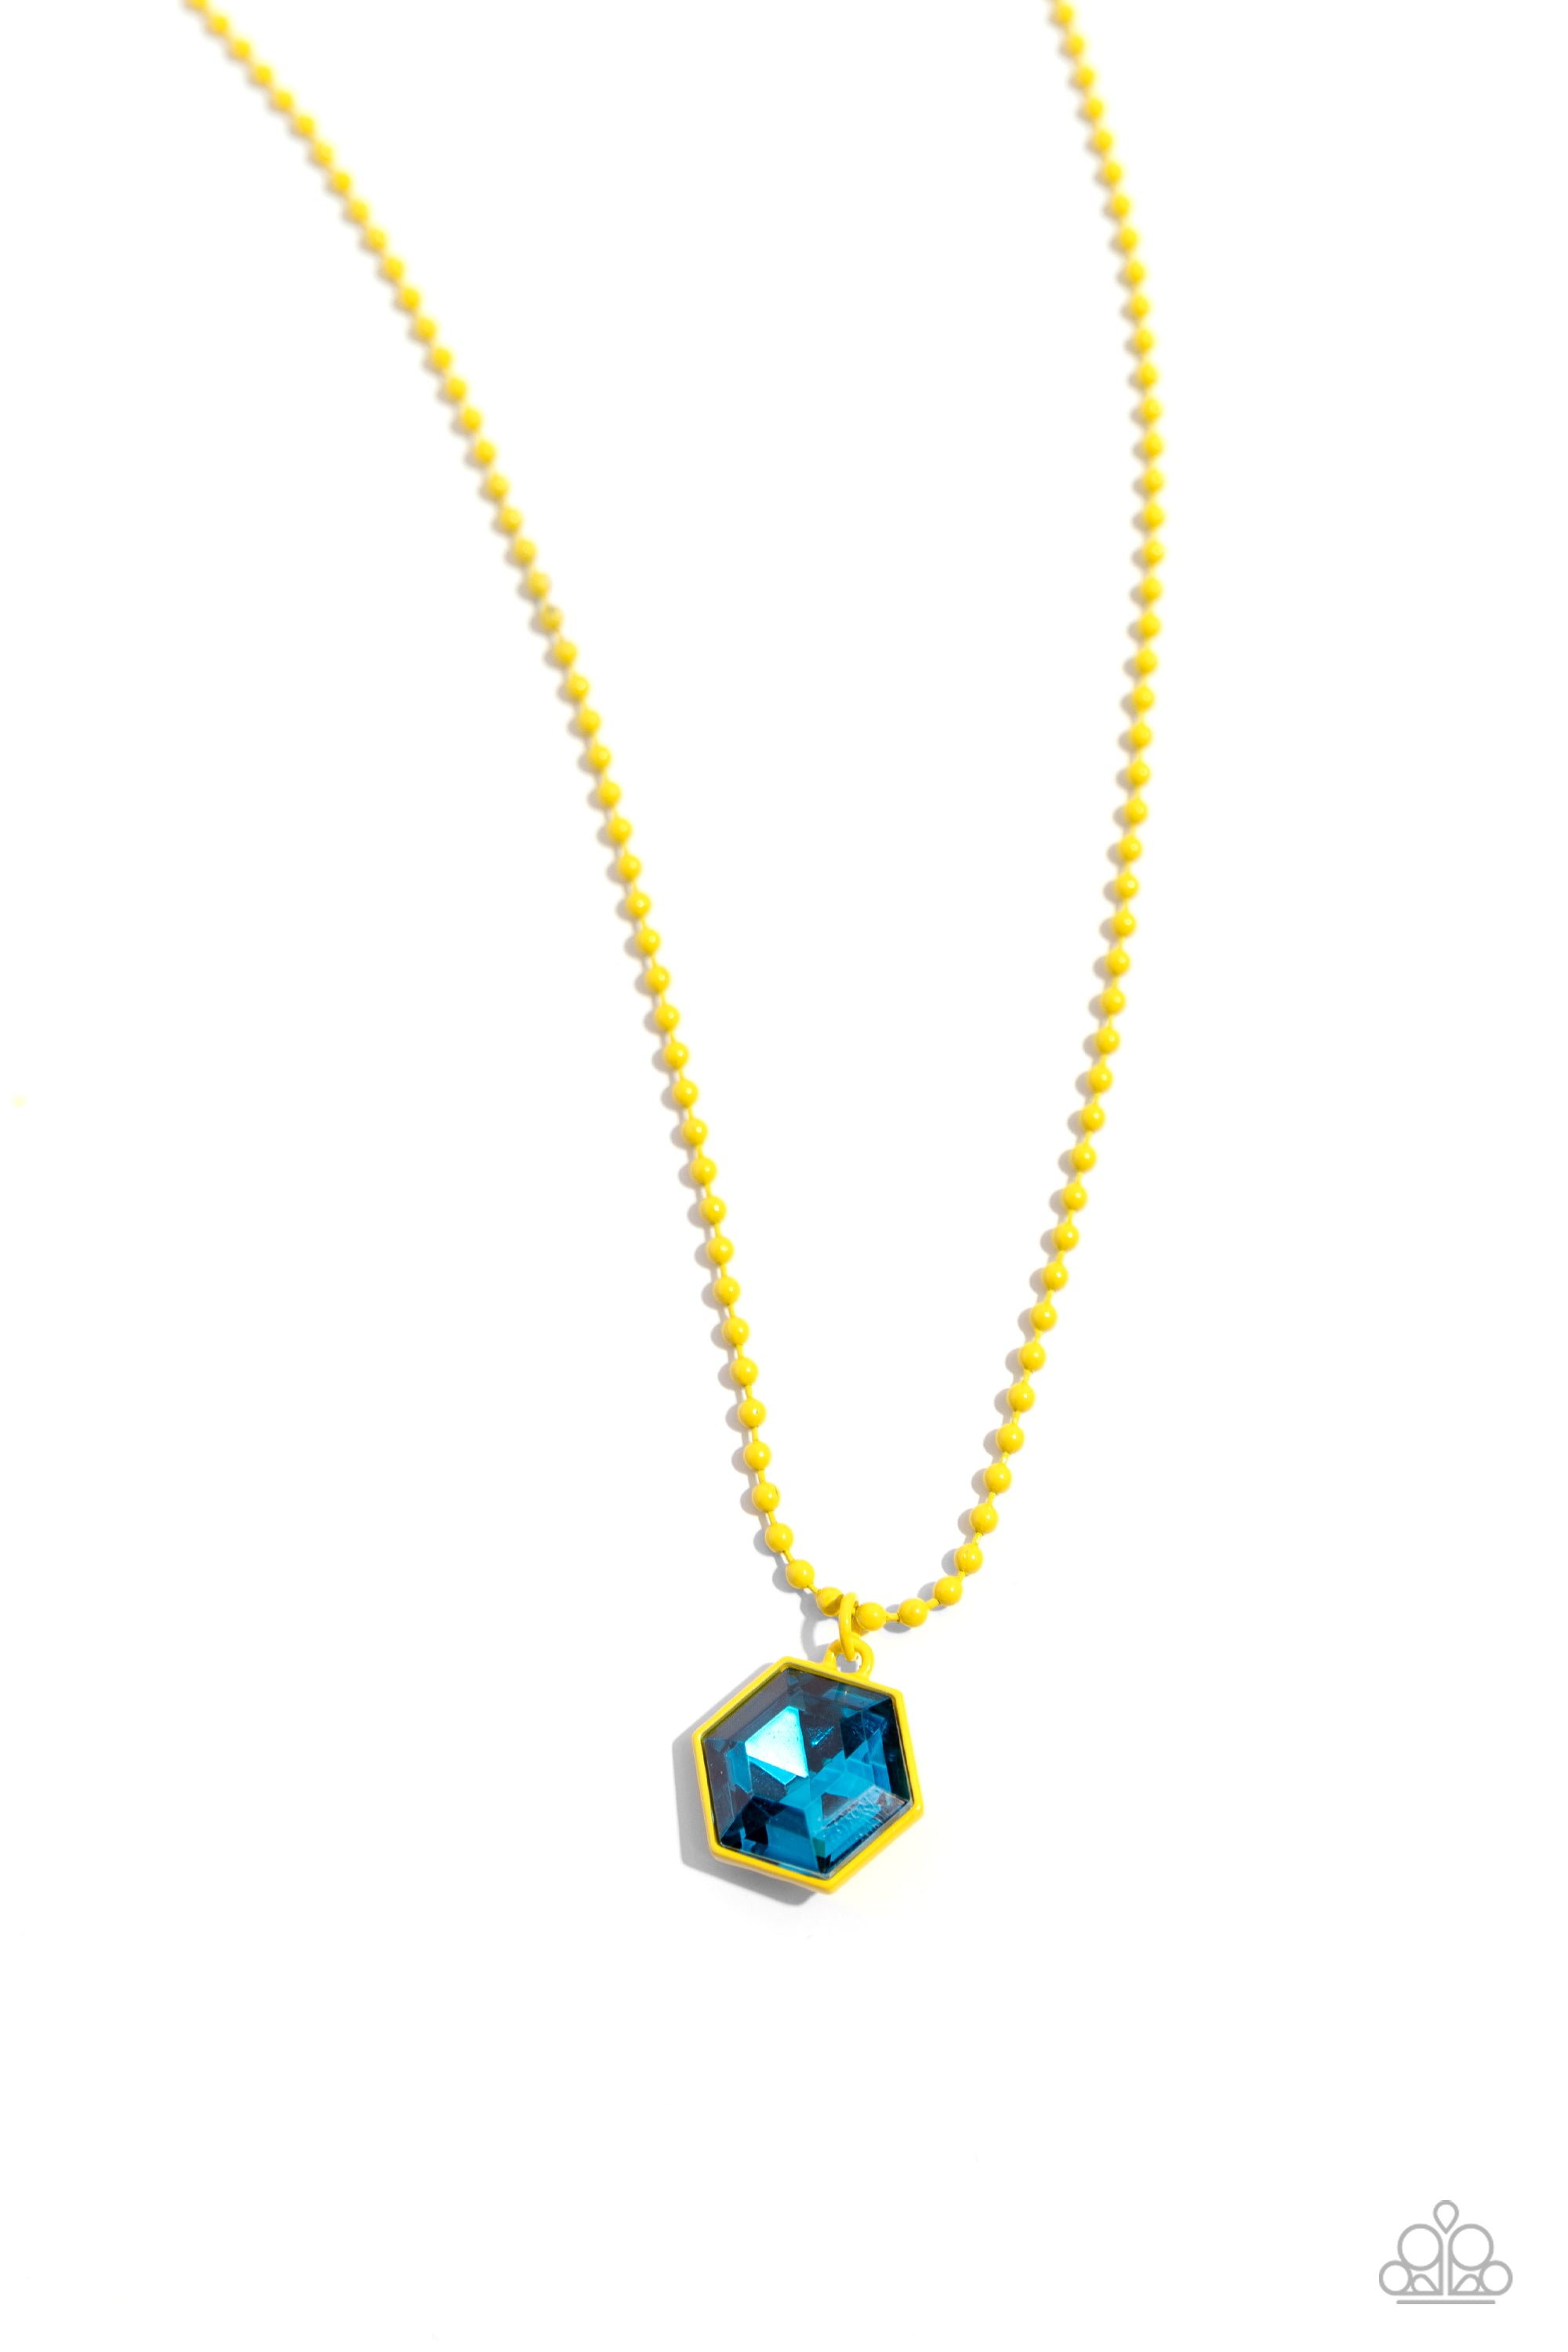 SPRINKLE OF SIMPLICITY YELLOW-NECKLACE